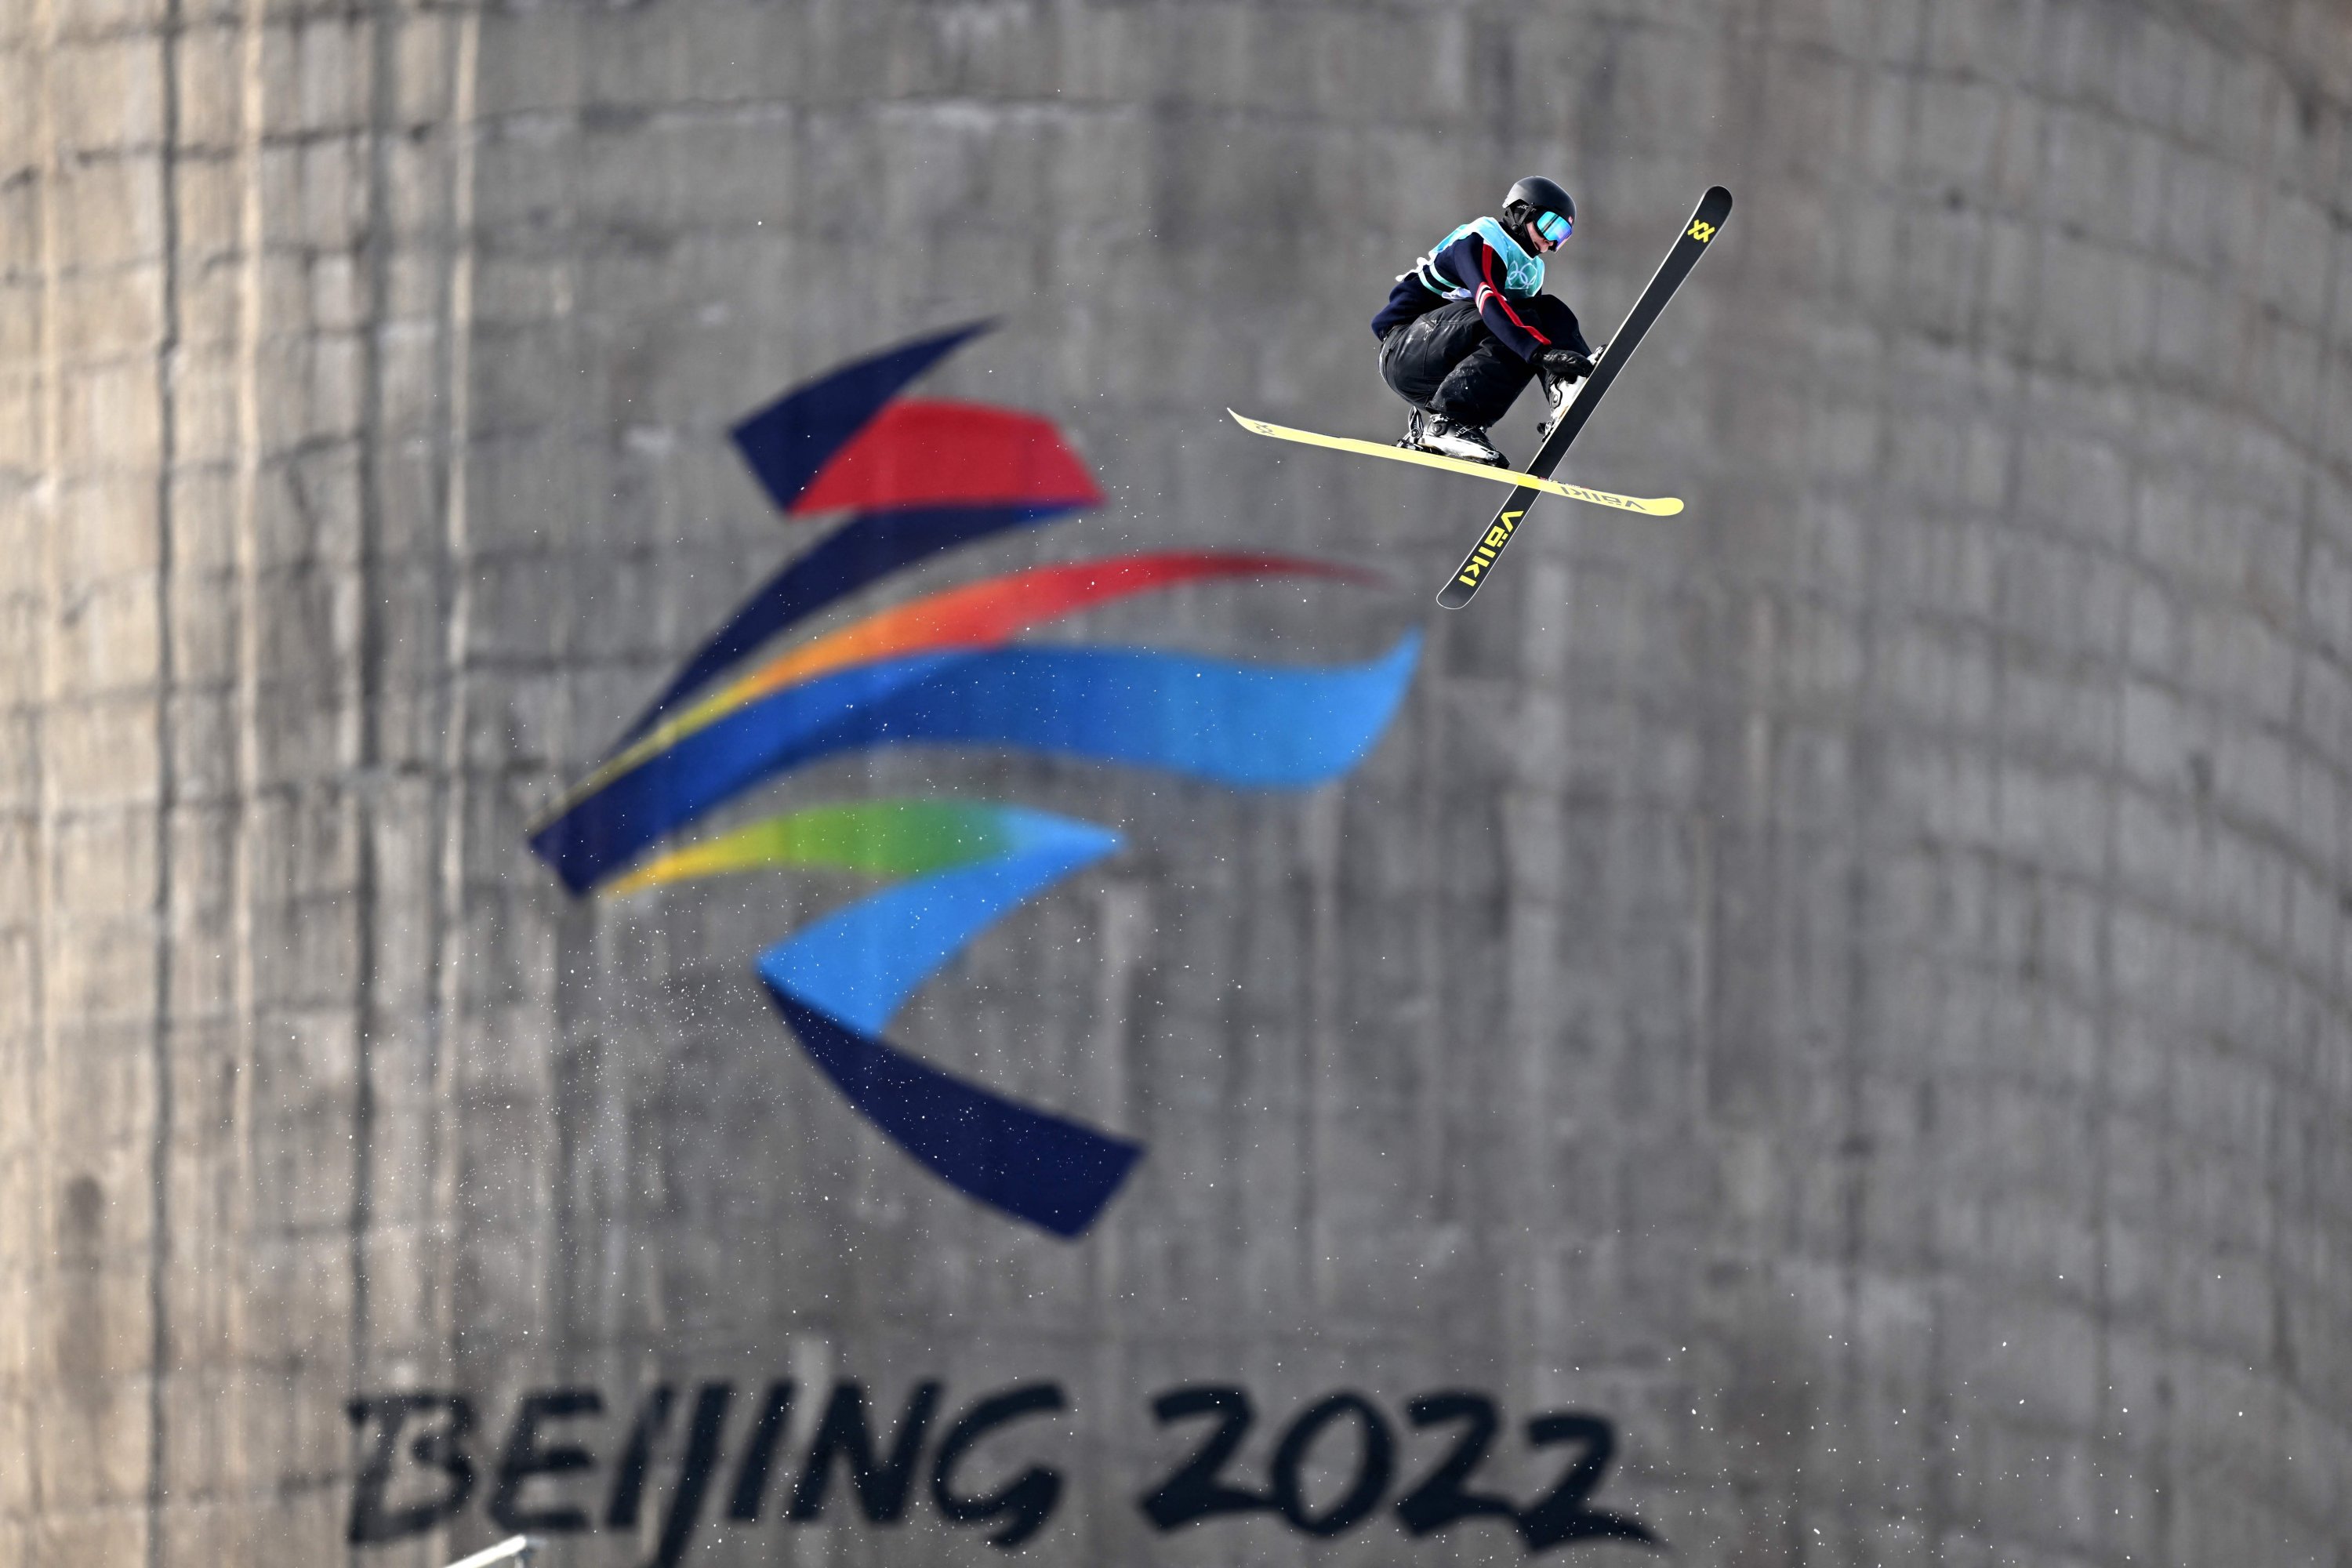 Norway's Birk Ruud competes in the freestyle skiing men's freeski big air qualification run during the Beijing 2022 Winter Olympic Games, Beijing, China, Feb. 7, 2022. (AFP Photo)